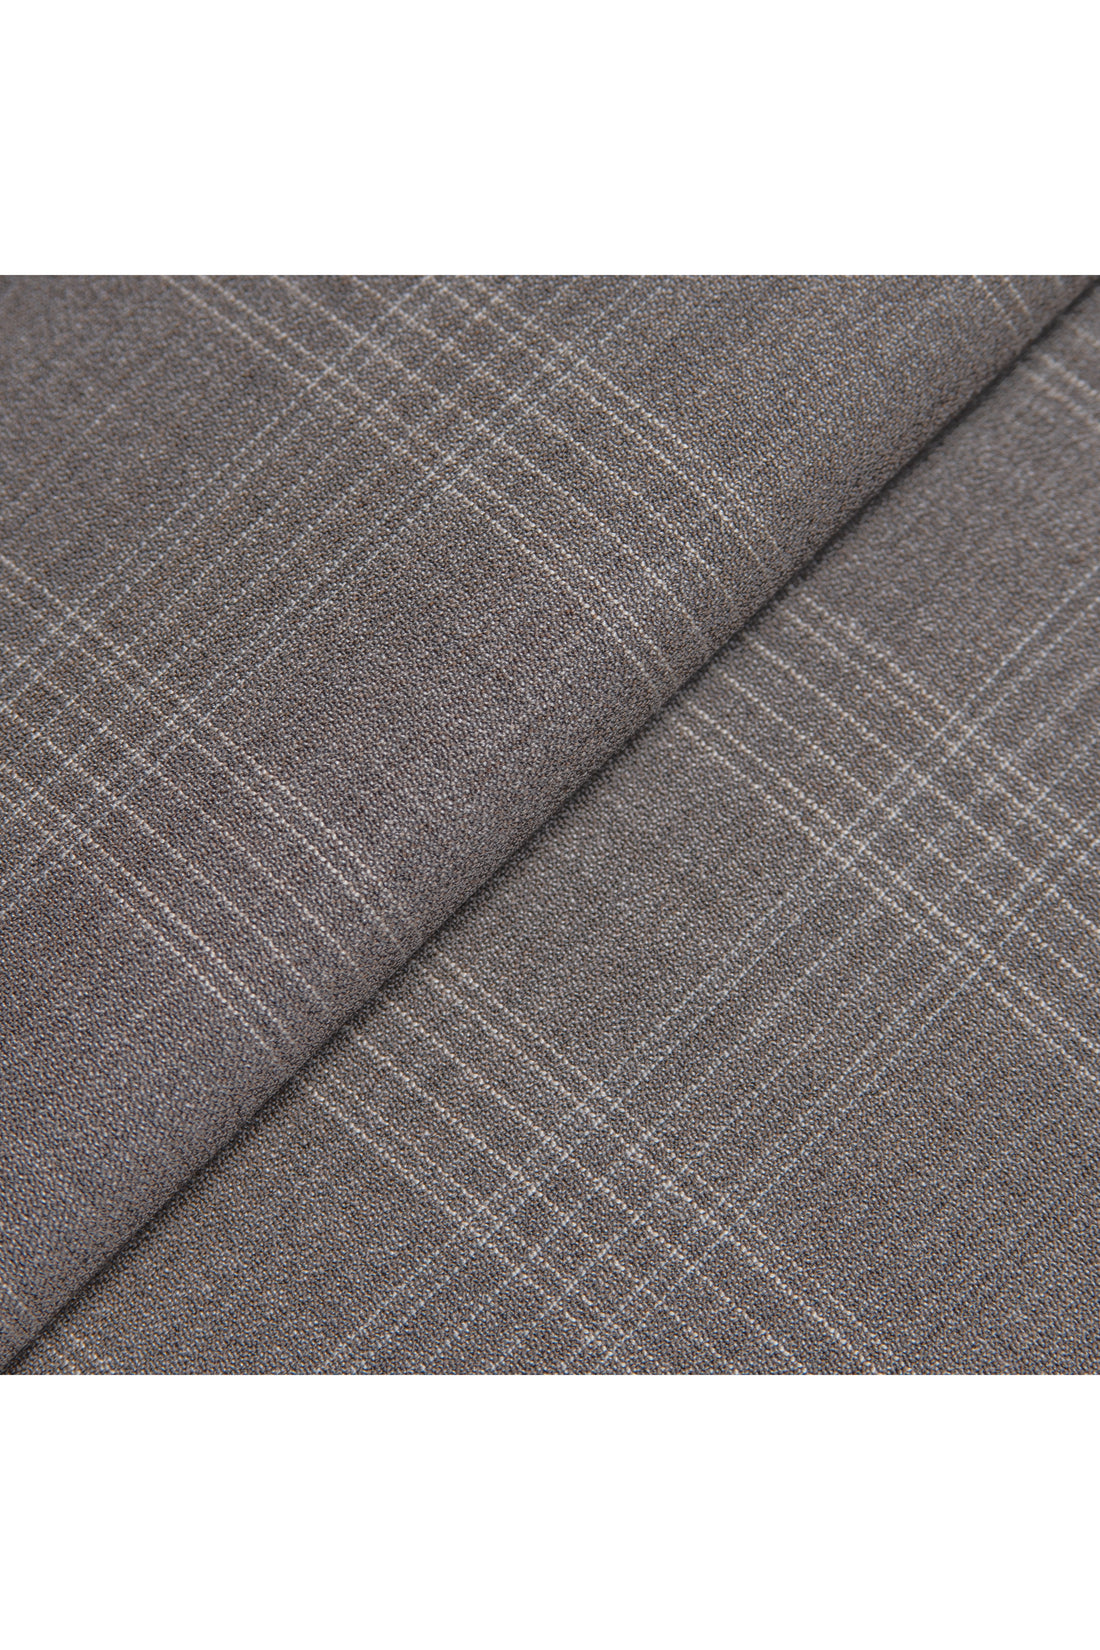 Taupe and Tan 130's Plaid Suit